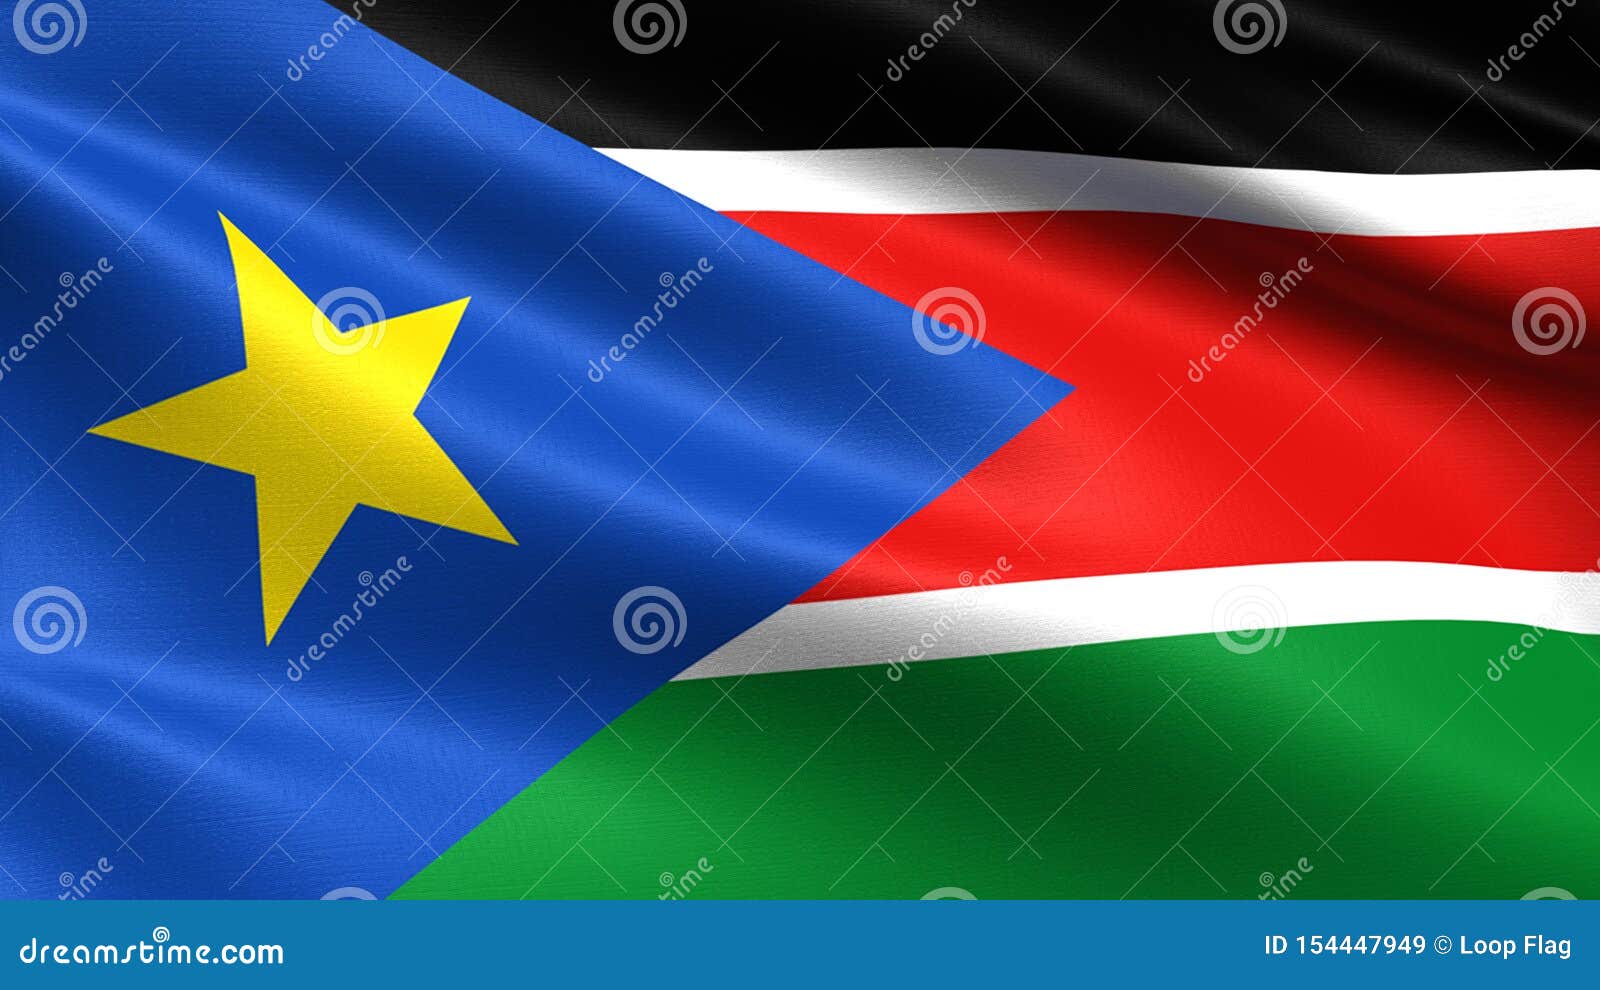 south sudan flag, with waving fabric texture